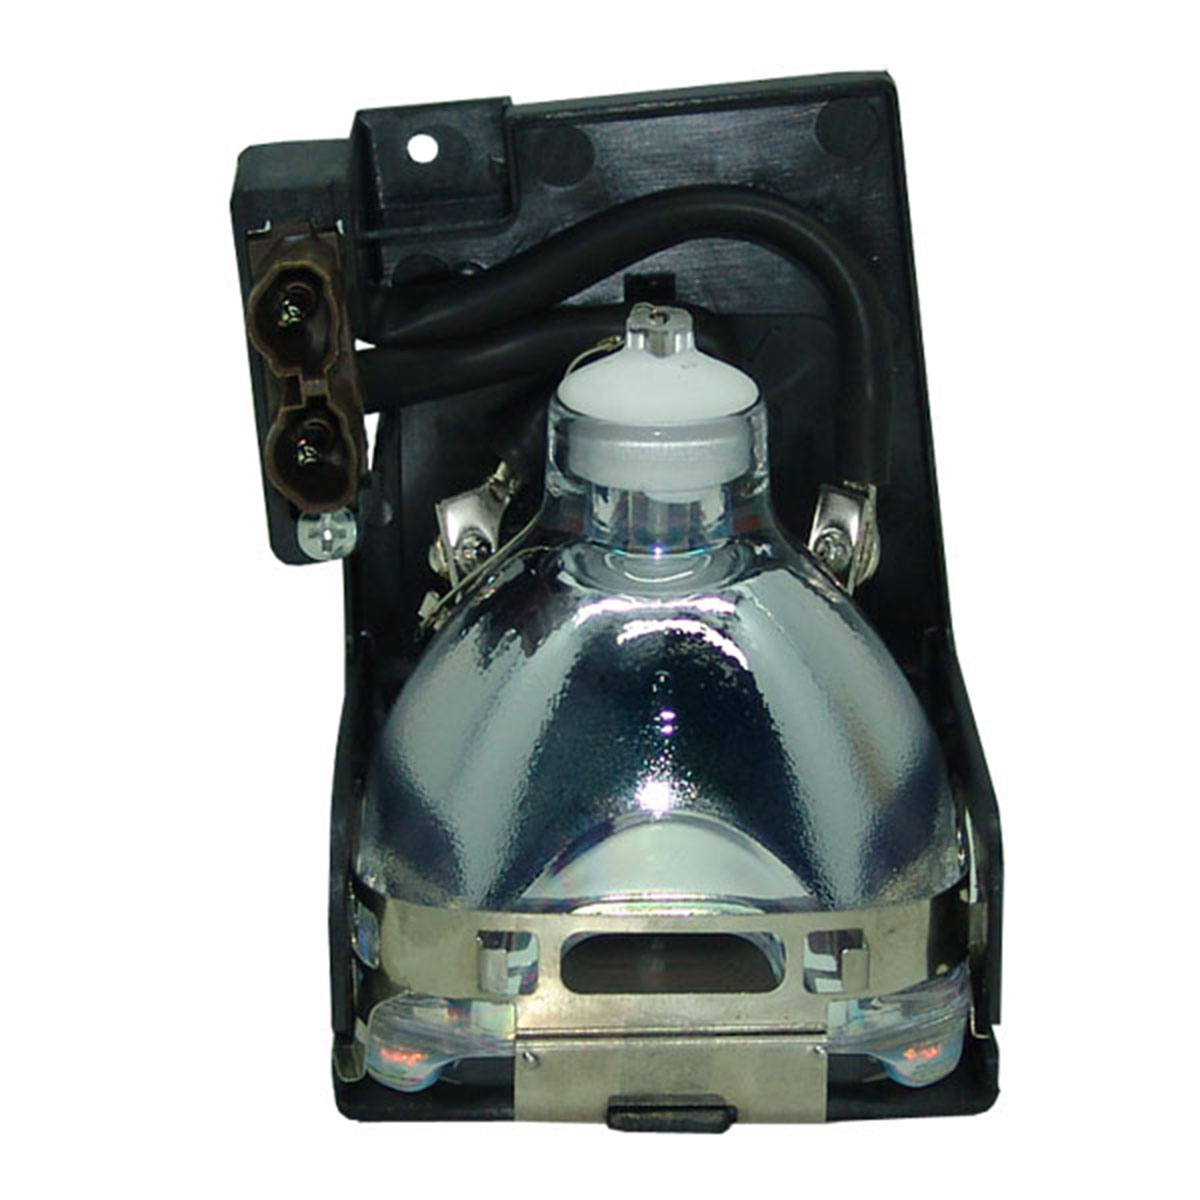 Lutema Economy Bulb for Eiki 610-300-7267 Projector (Lamp with Housing) - image 4 of 6